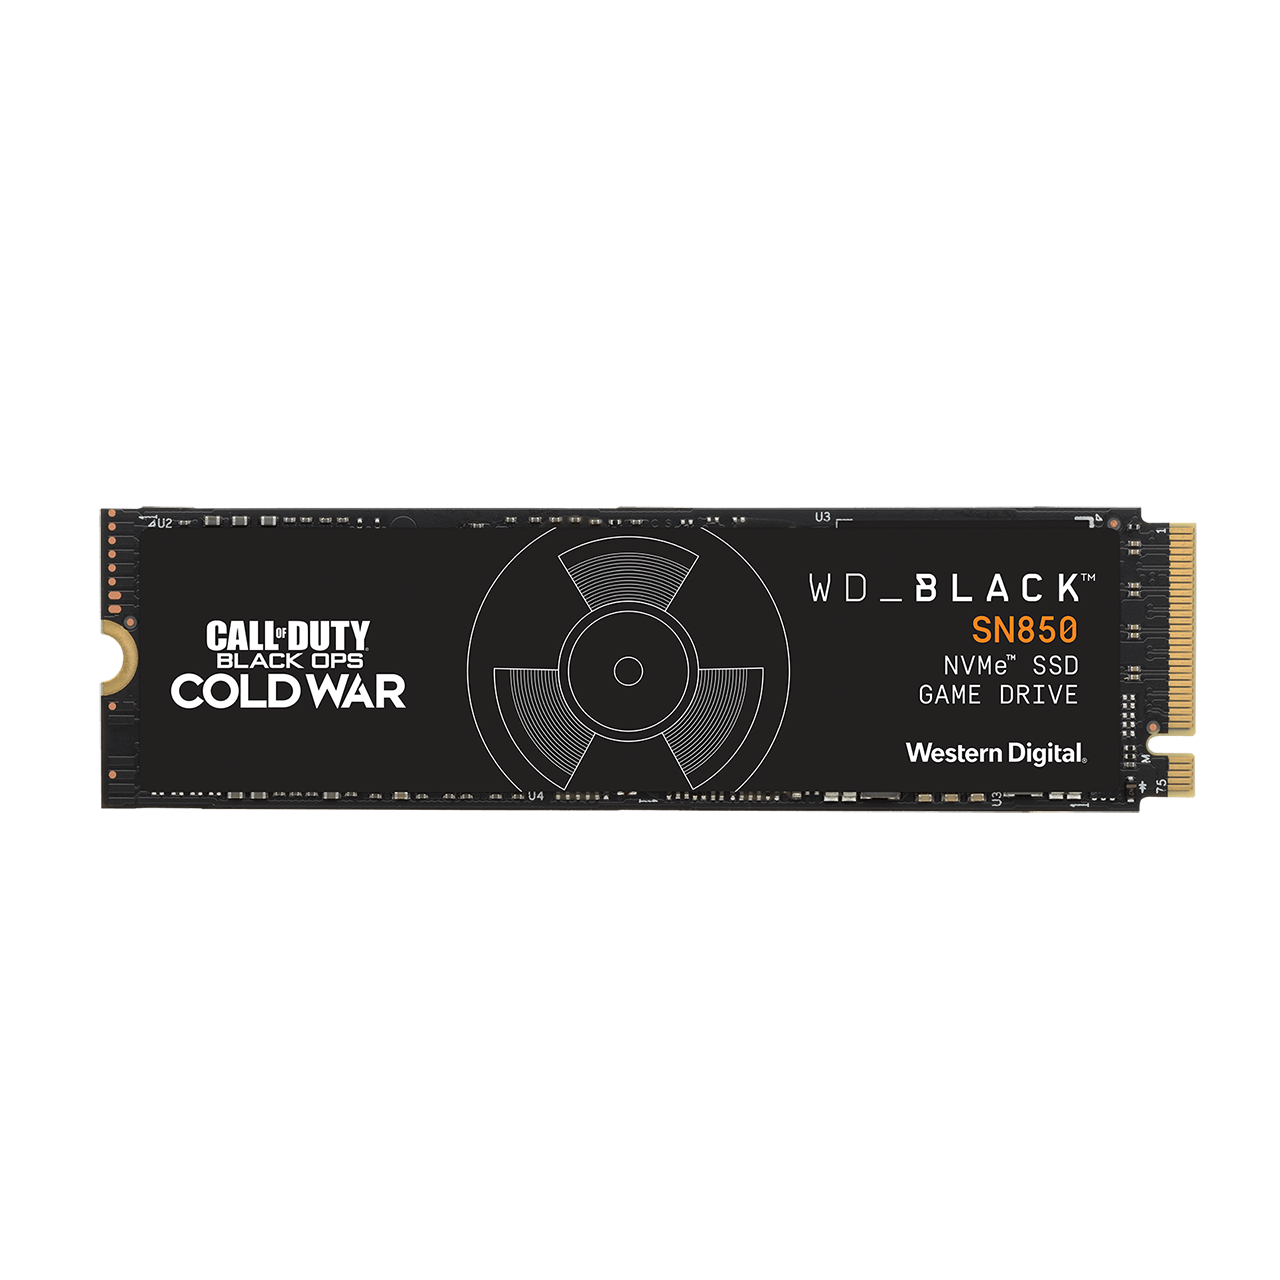 WD_BLACK™ Call of Duty®: Black Ops Cold War Special Edition SN850 NVMe™ SSD